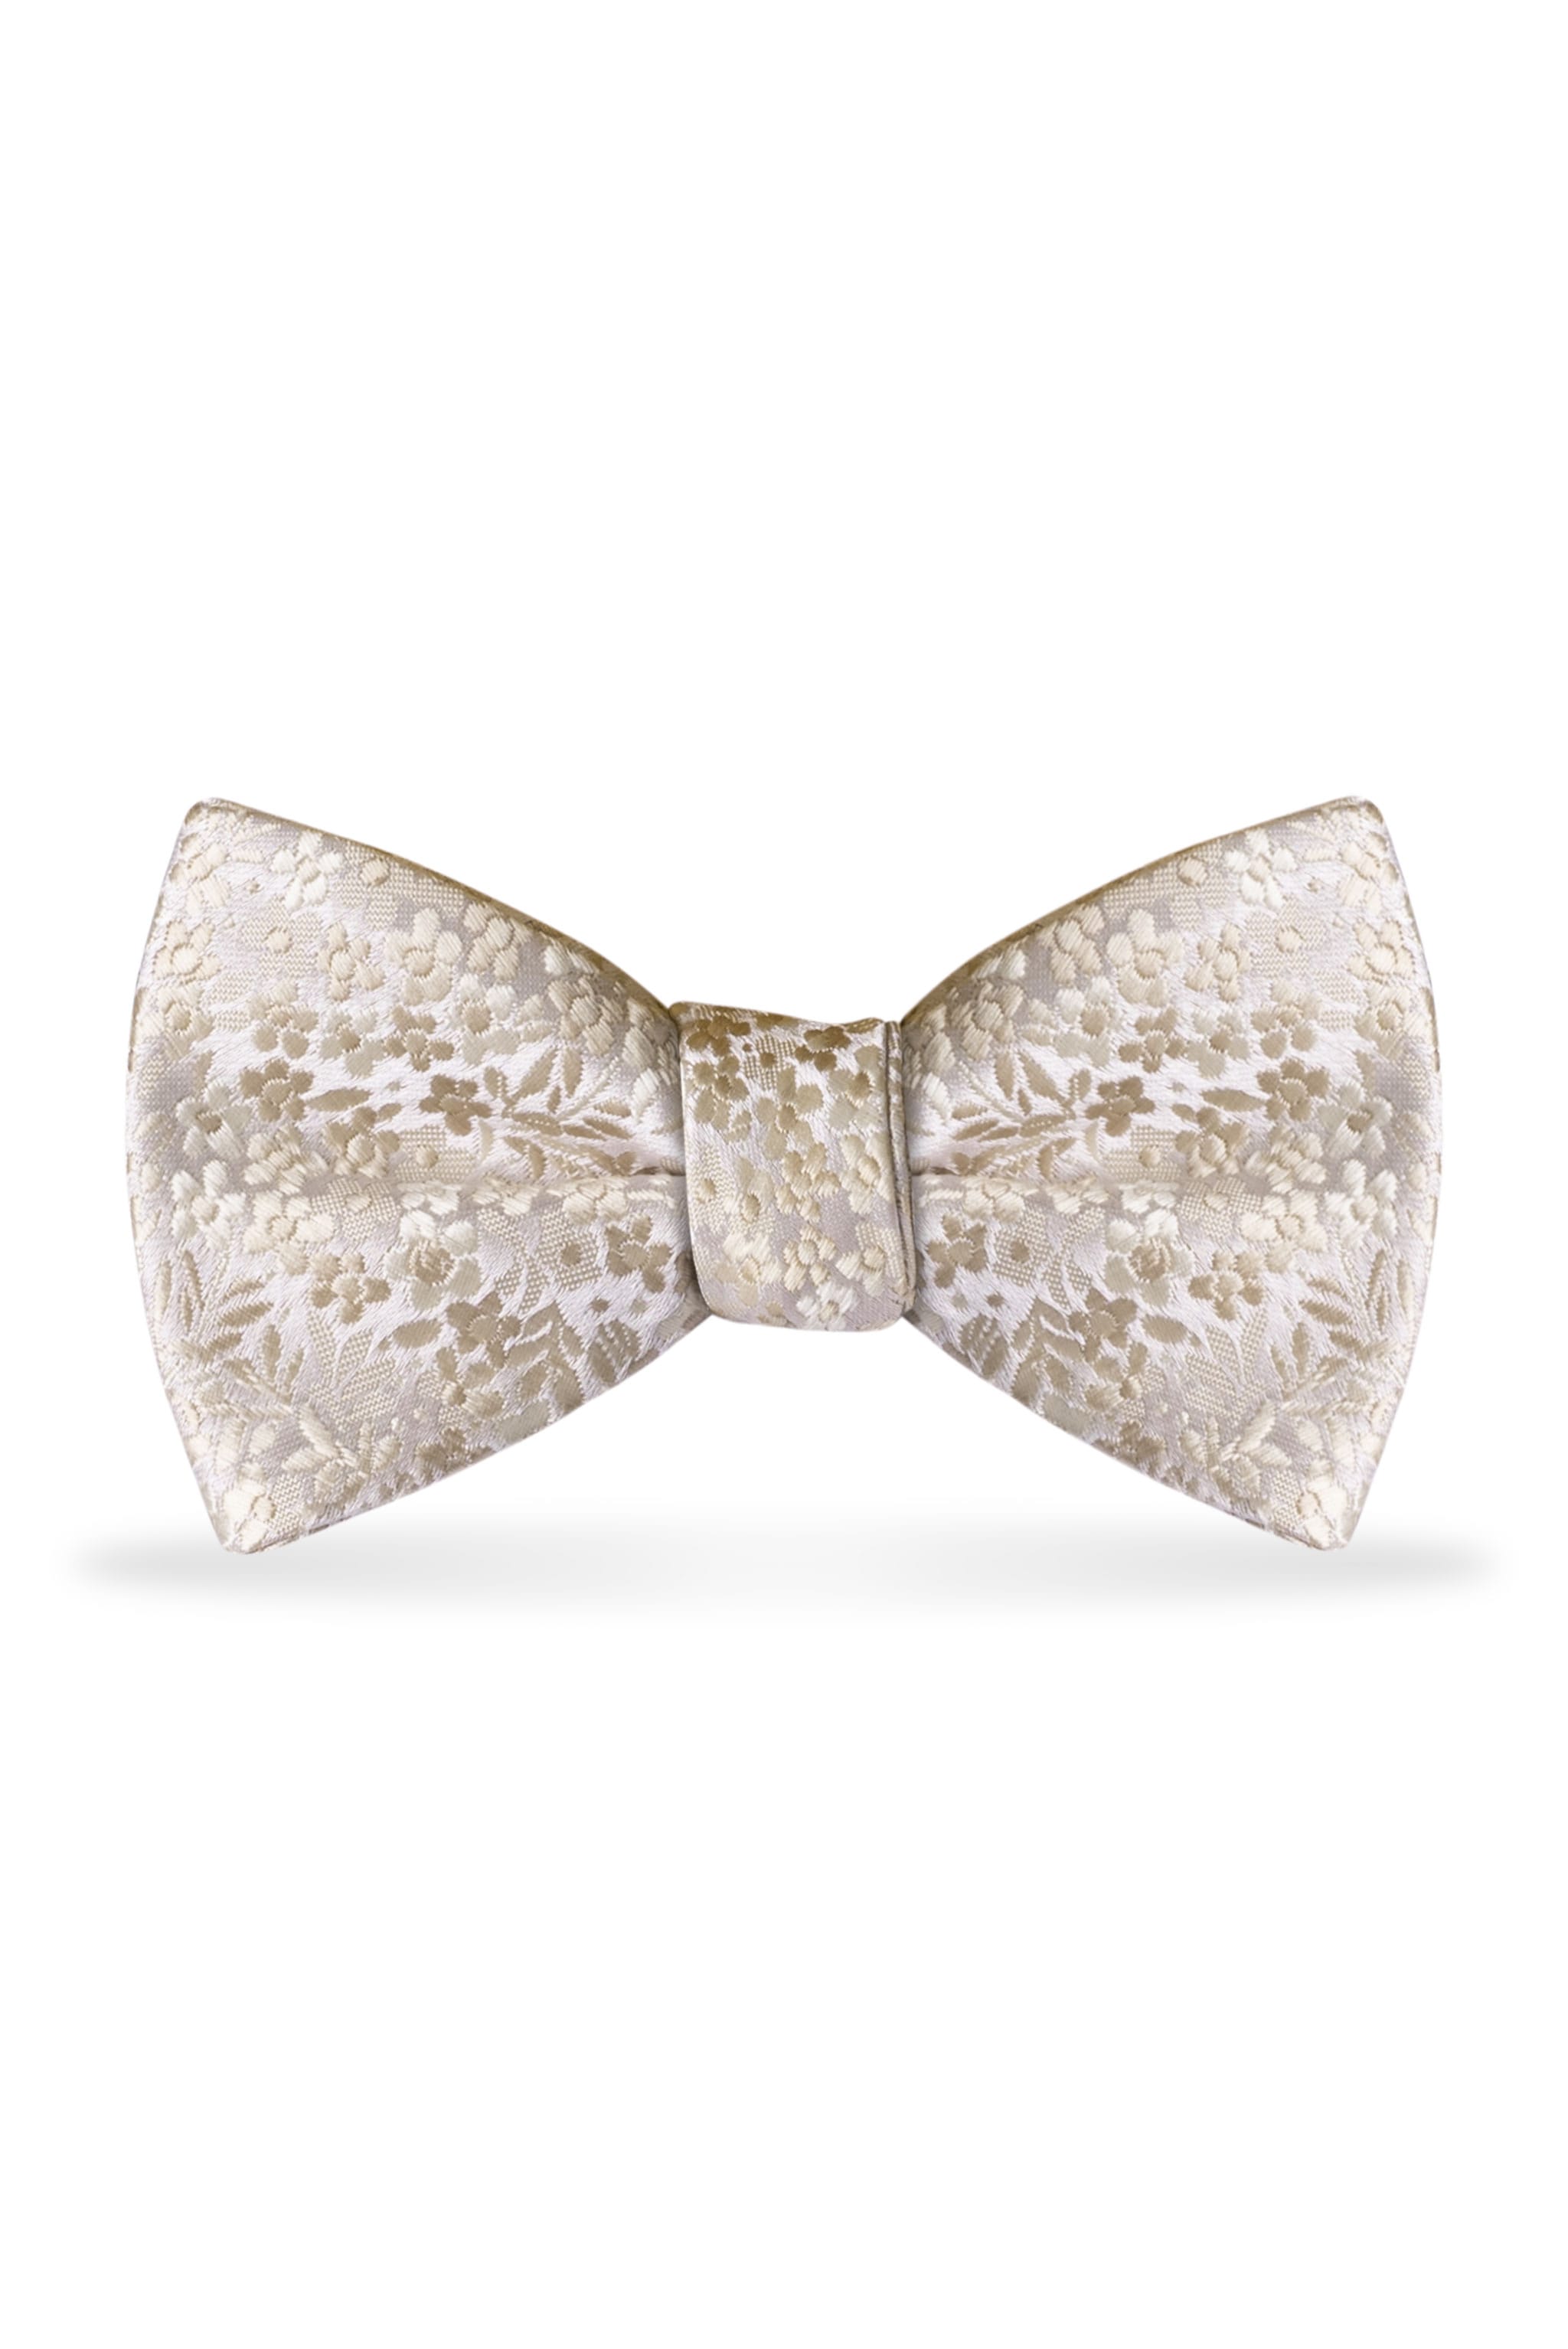 Floral Champagne Bow Tie